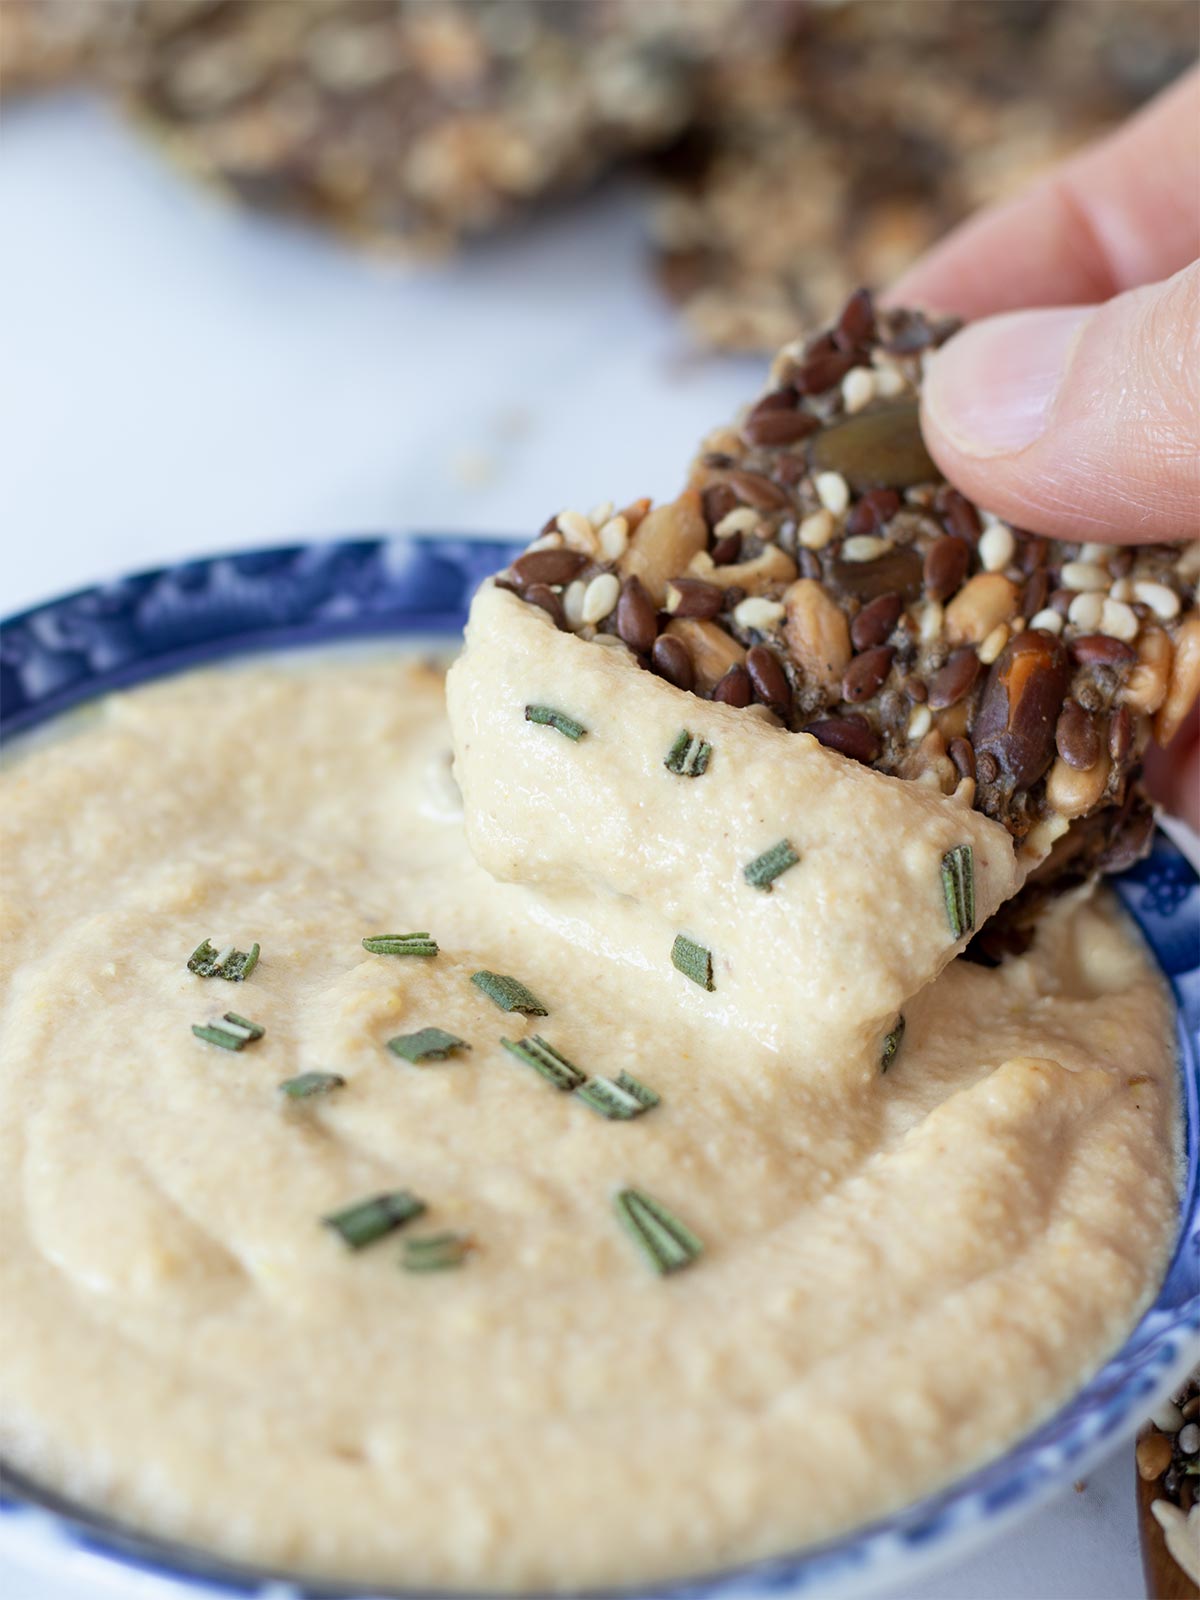 5 Super sseds crackers in female hand dipped in creamy homemade hummus garnished with chopped fresh rosemary